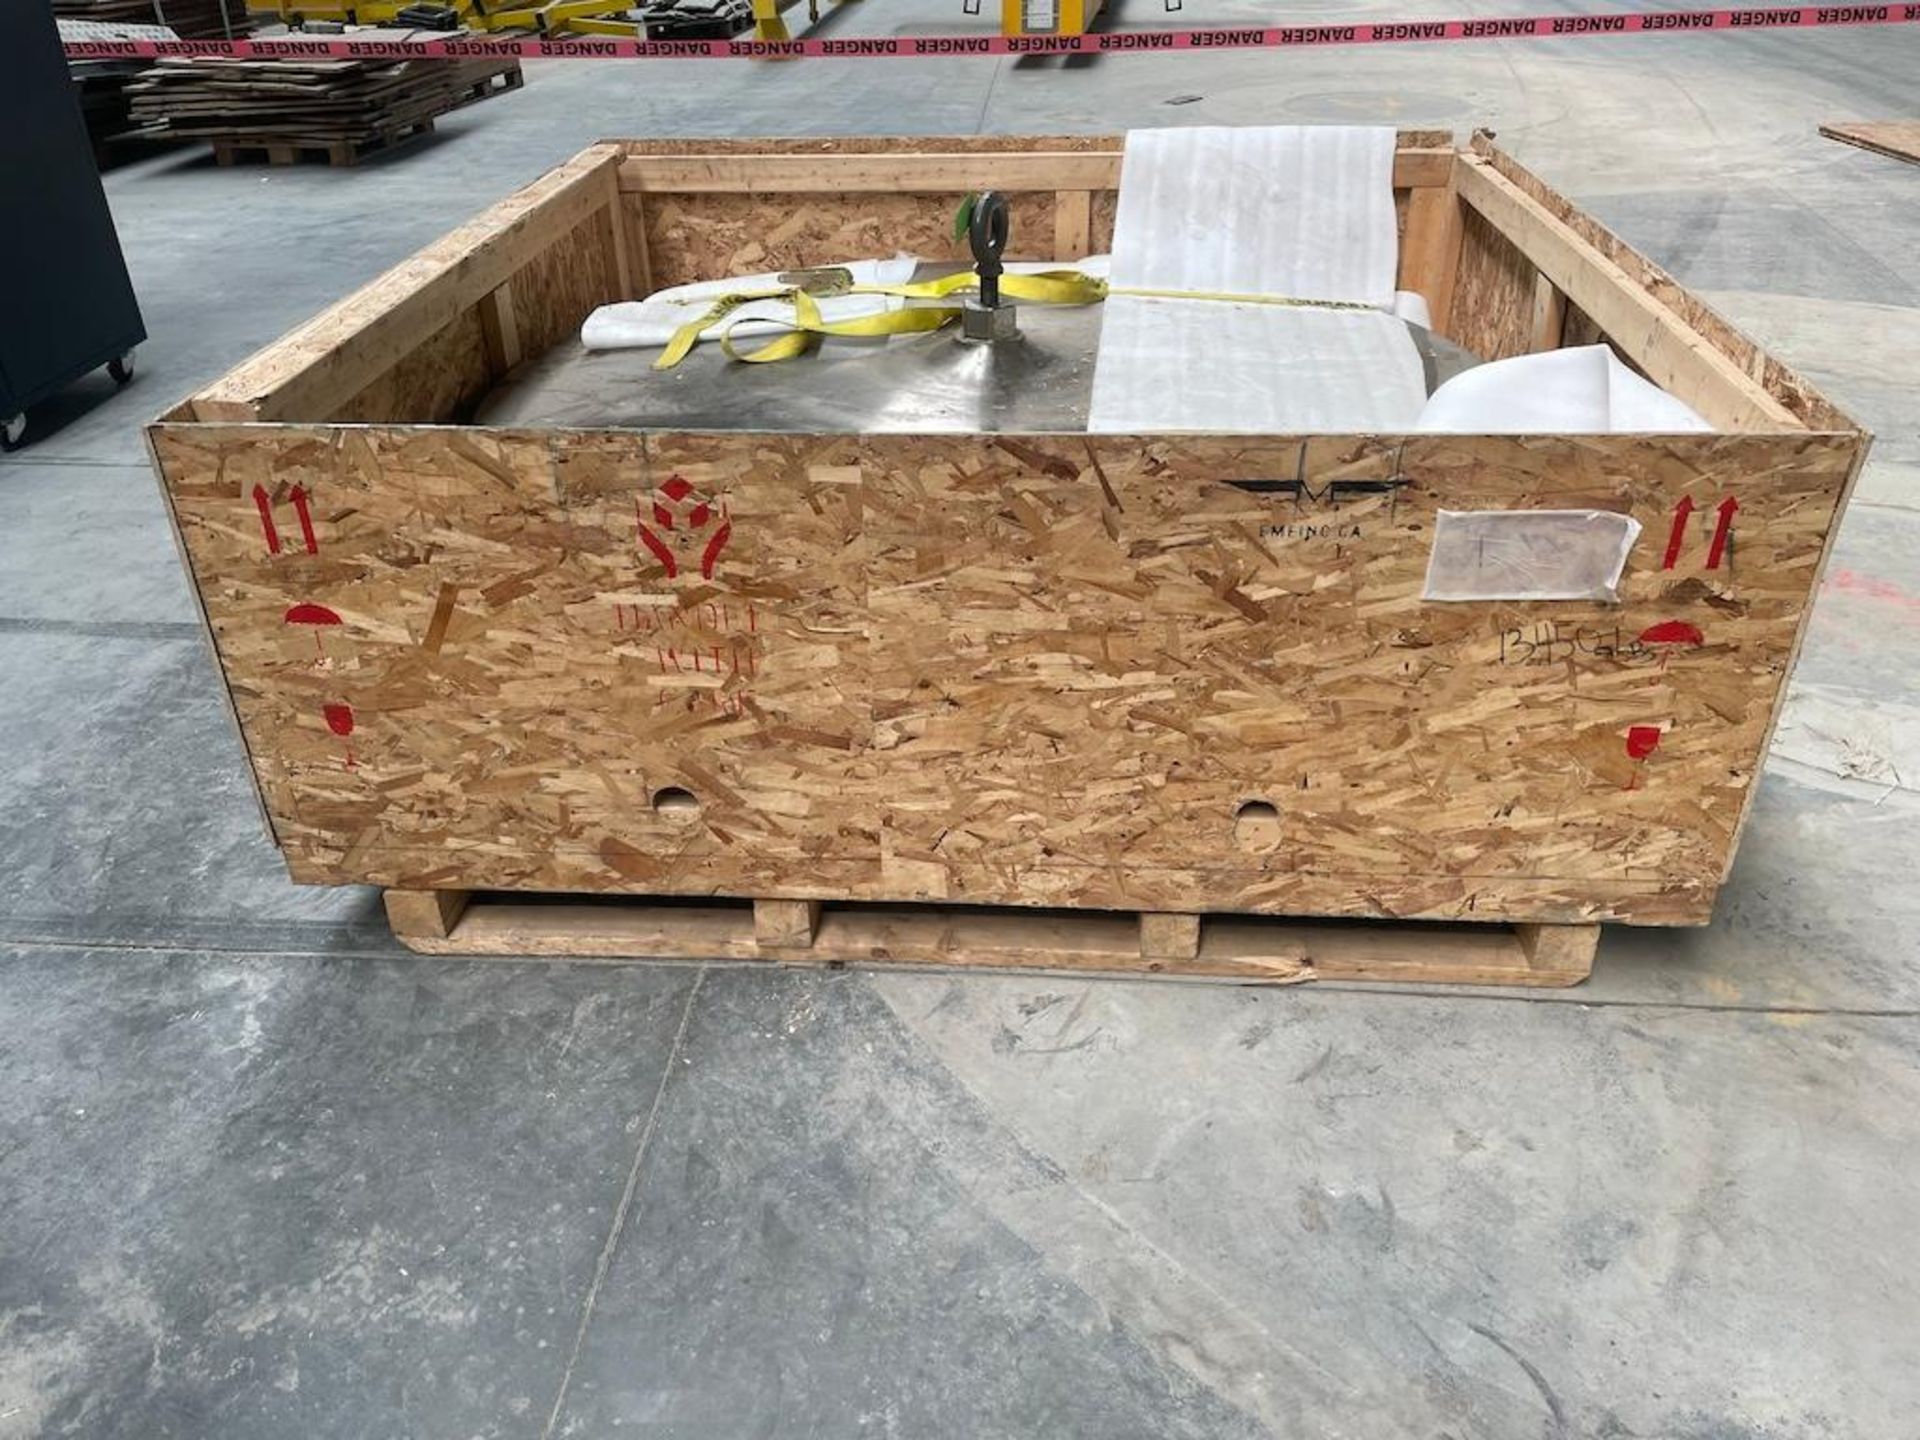 APPROX 7 FT DIAMETER X 8 INCH HIGH SOLID STEEL BLOCK IN CRATE, SAYS 13,450 LBS [MATANE] *PLEASE NOTE - Image 4 of 5